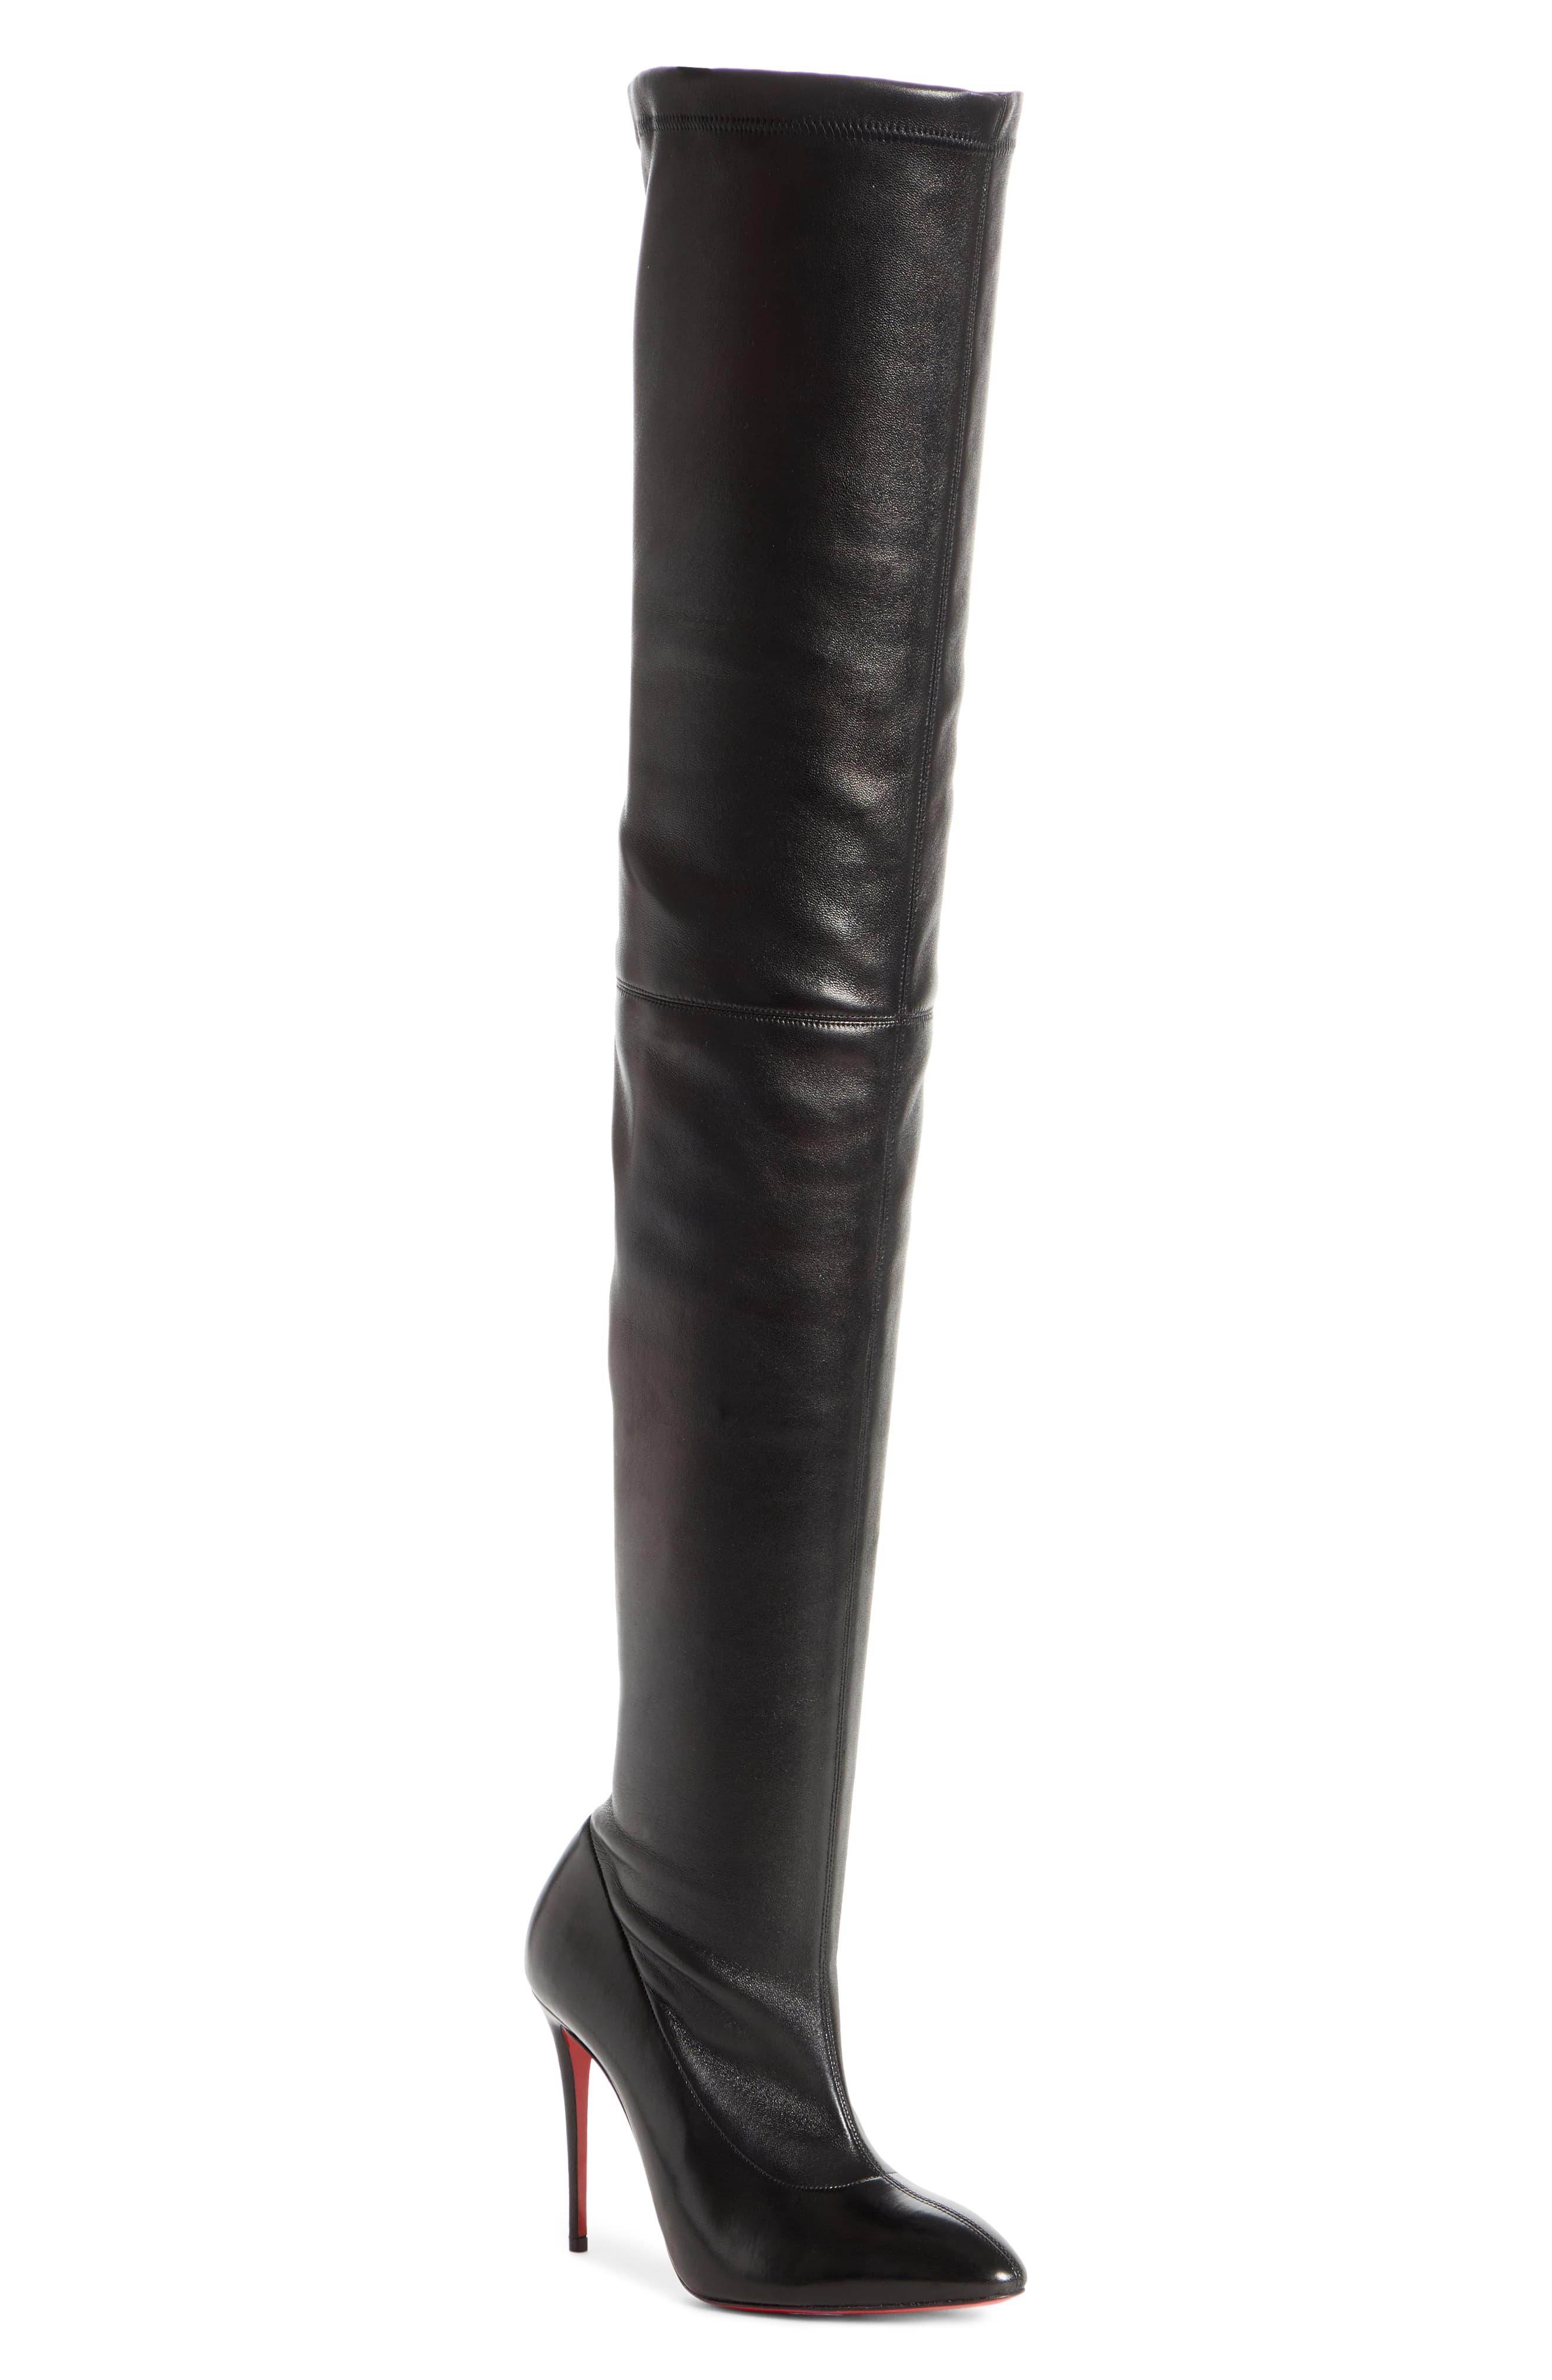 Christian Louboutin Elouix Over The Knee Boot in Black - Lyst